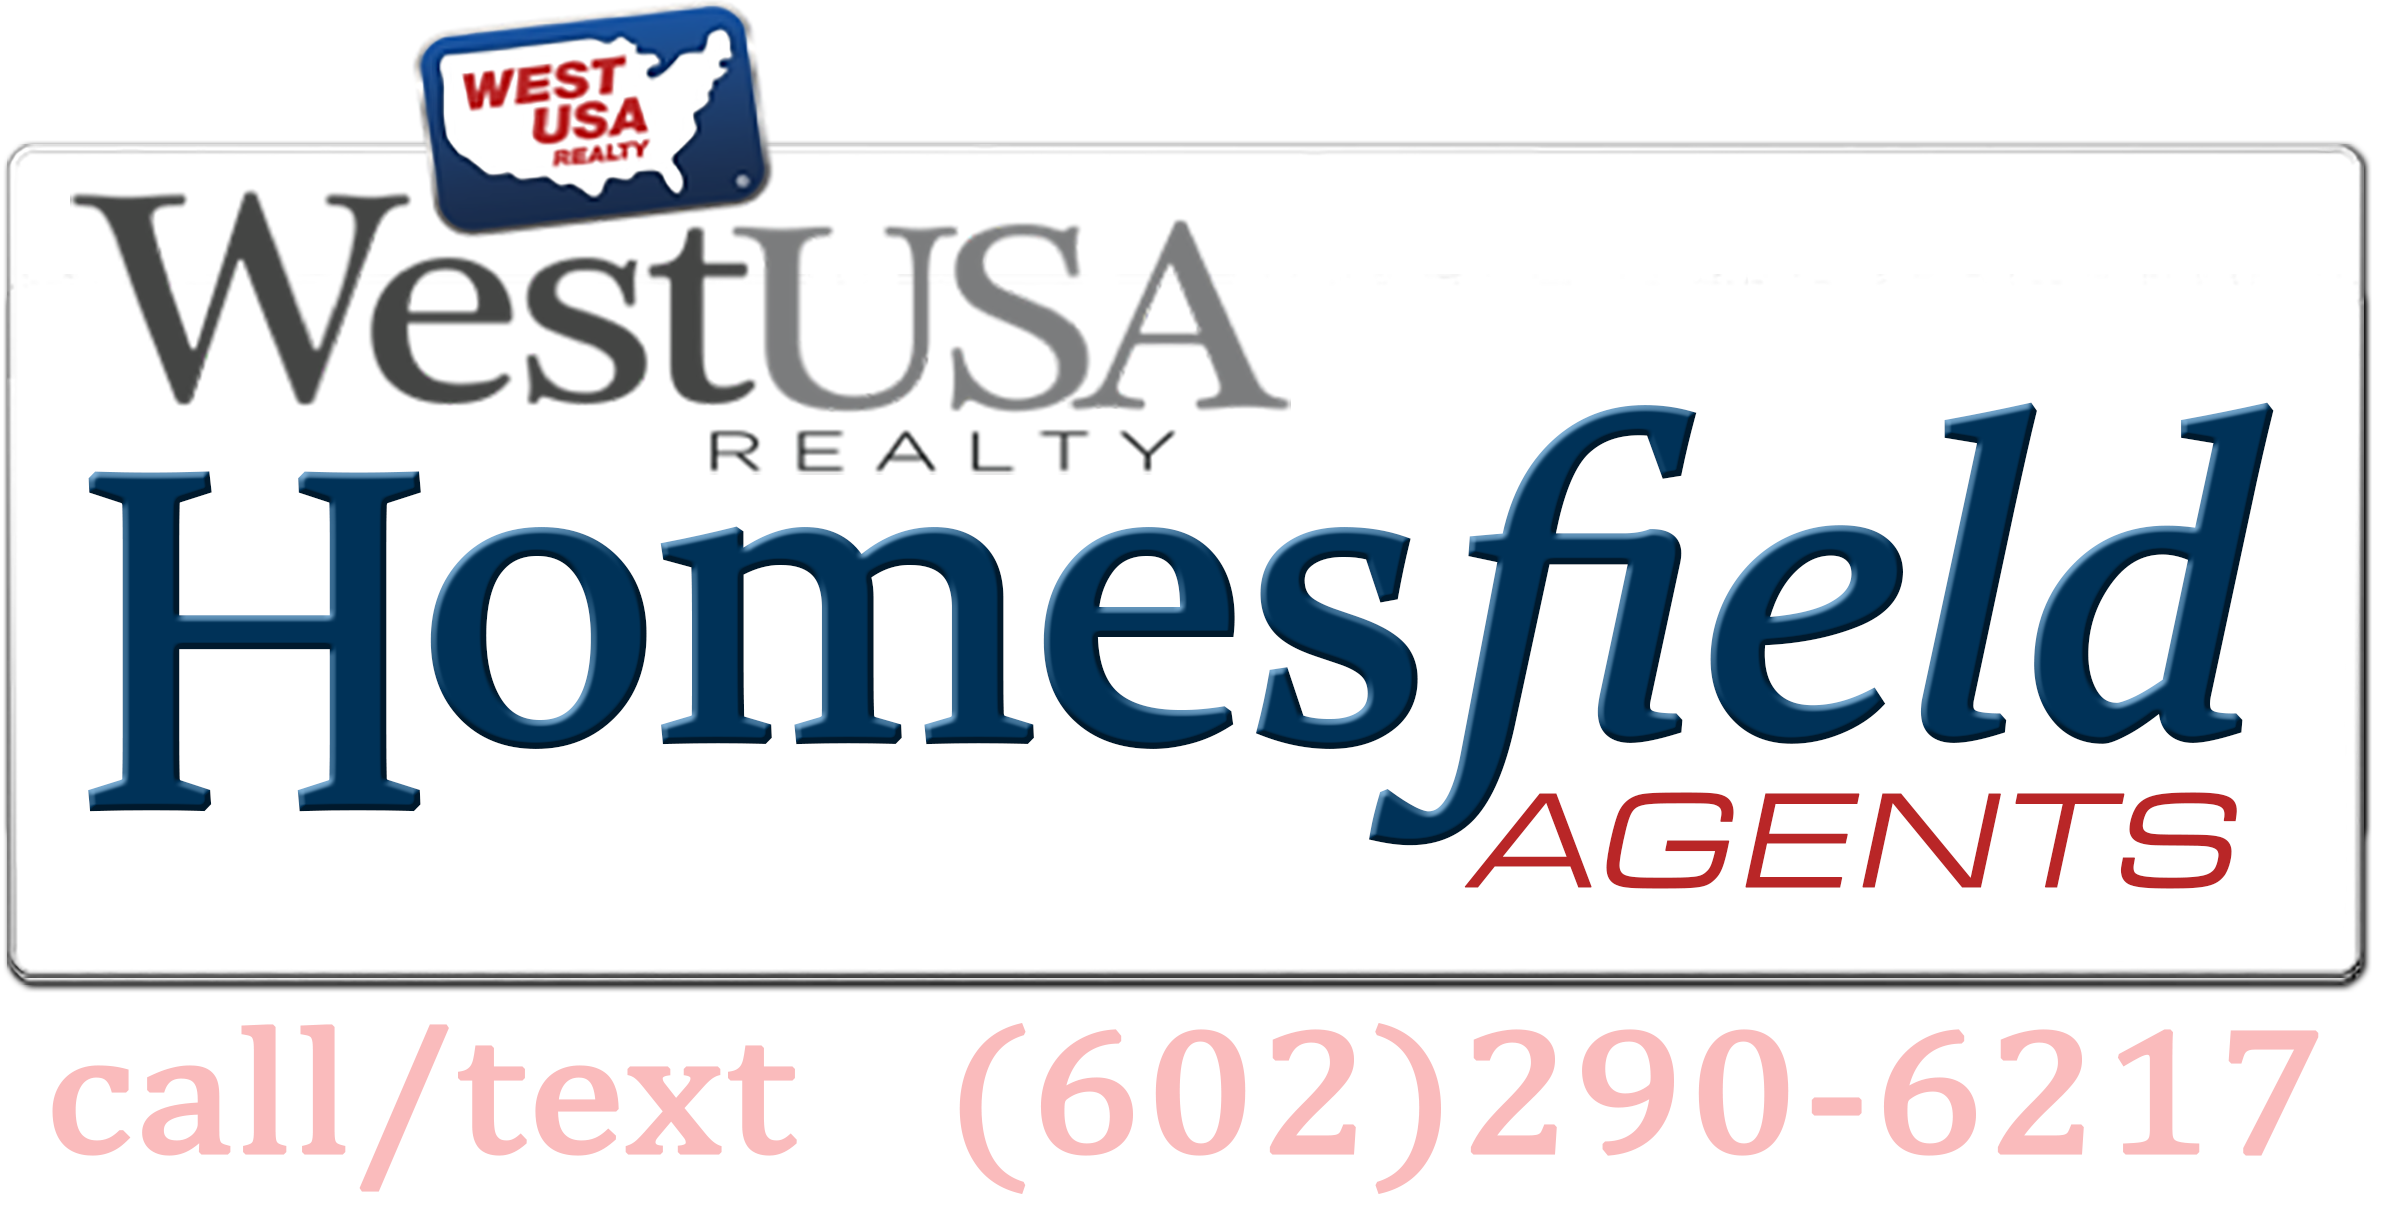 Homesfield Agents of West USA Realty in Tempe Arizona